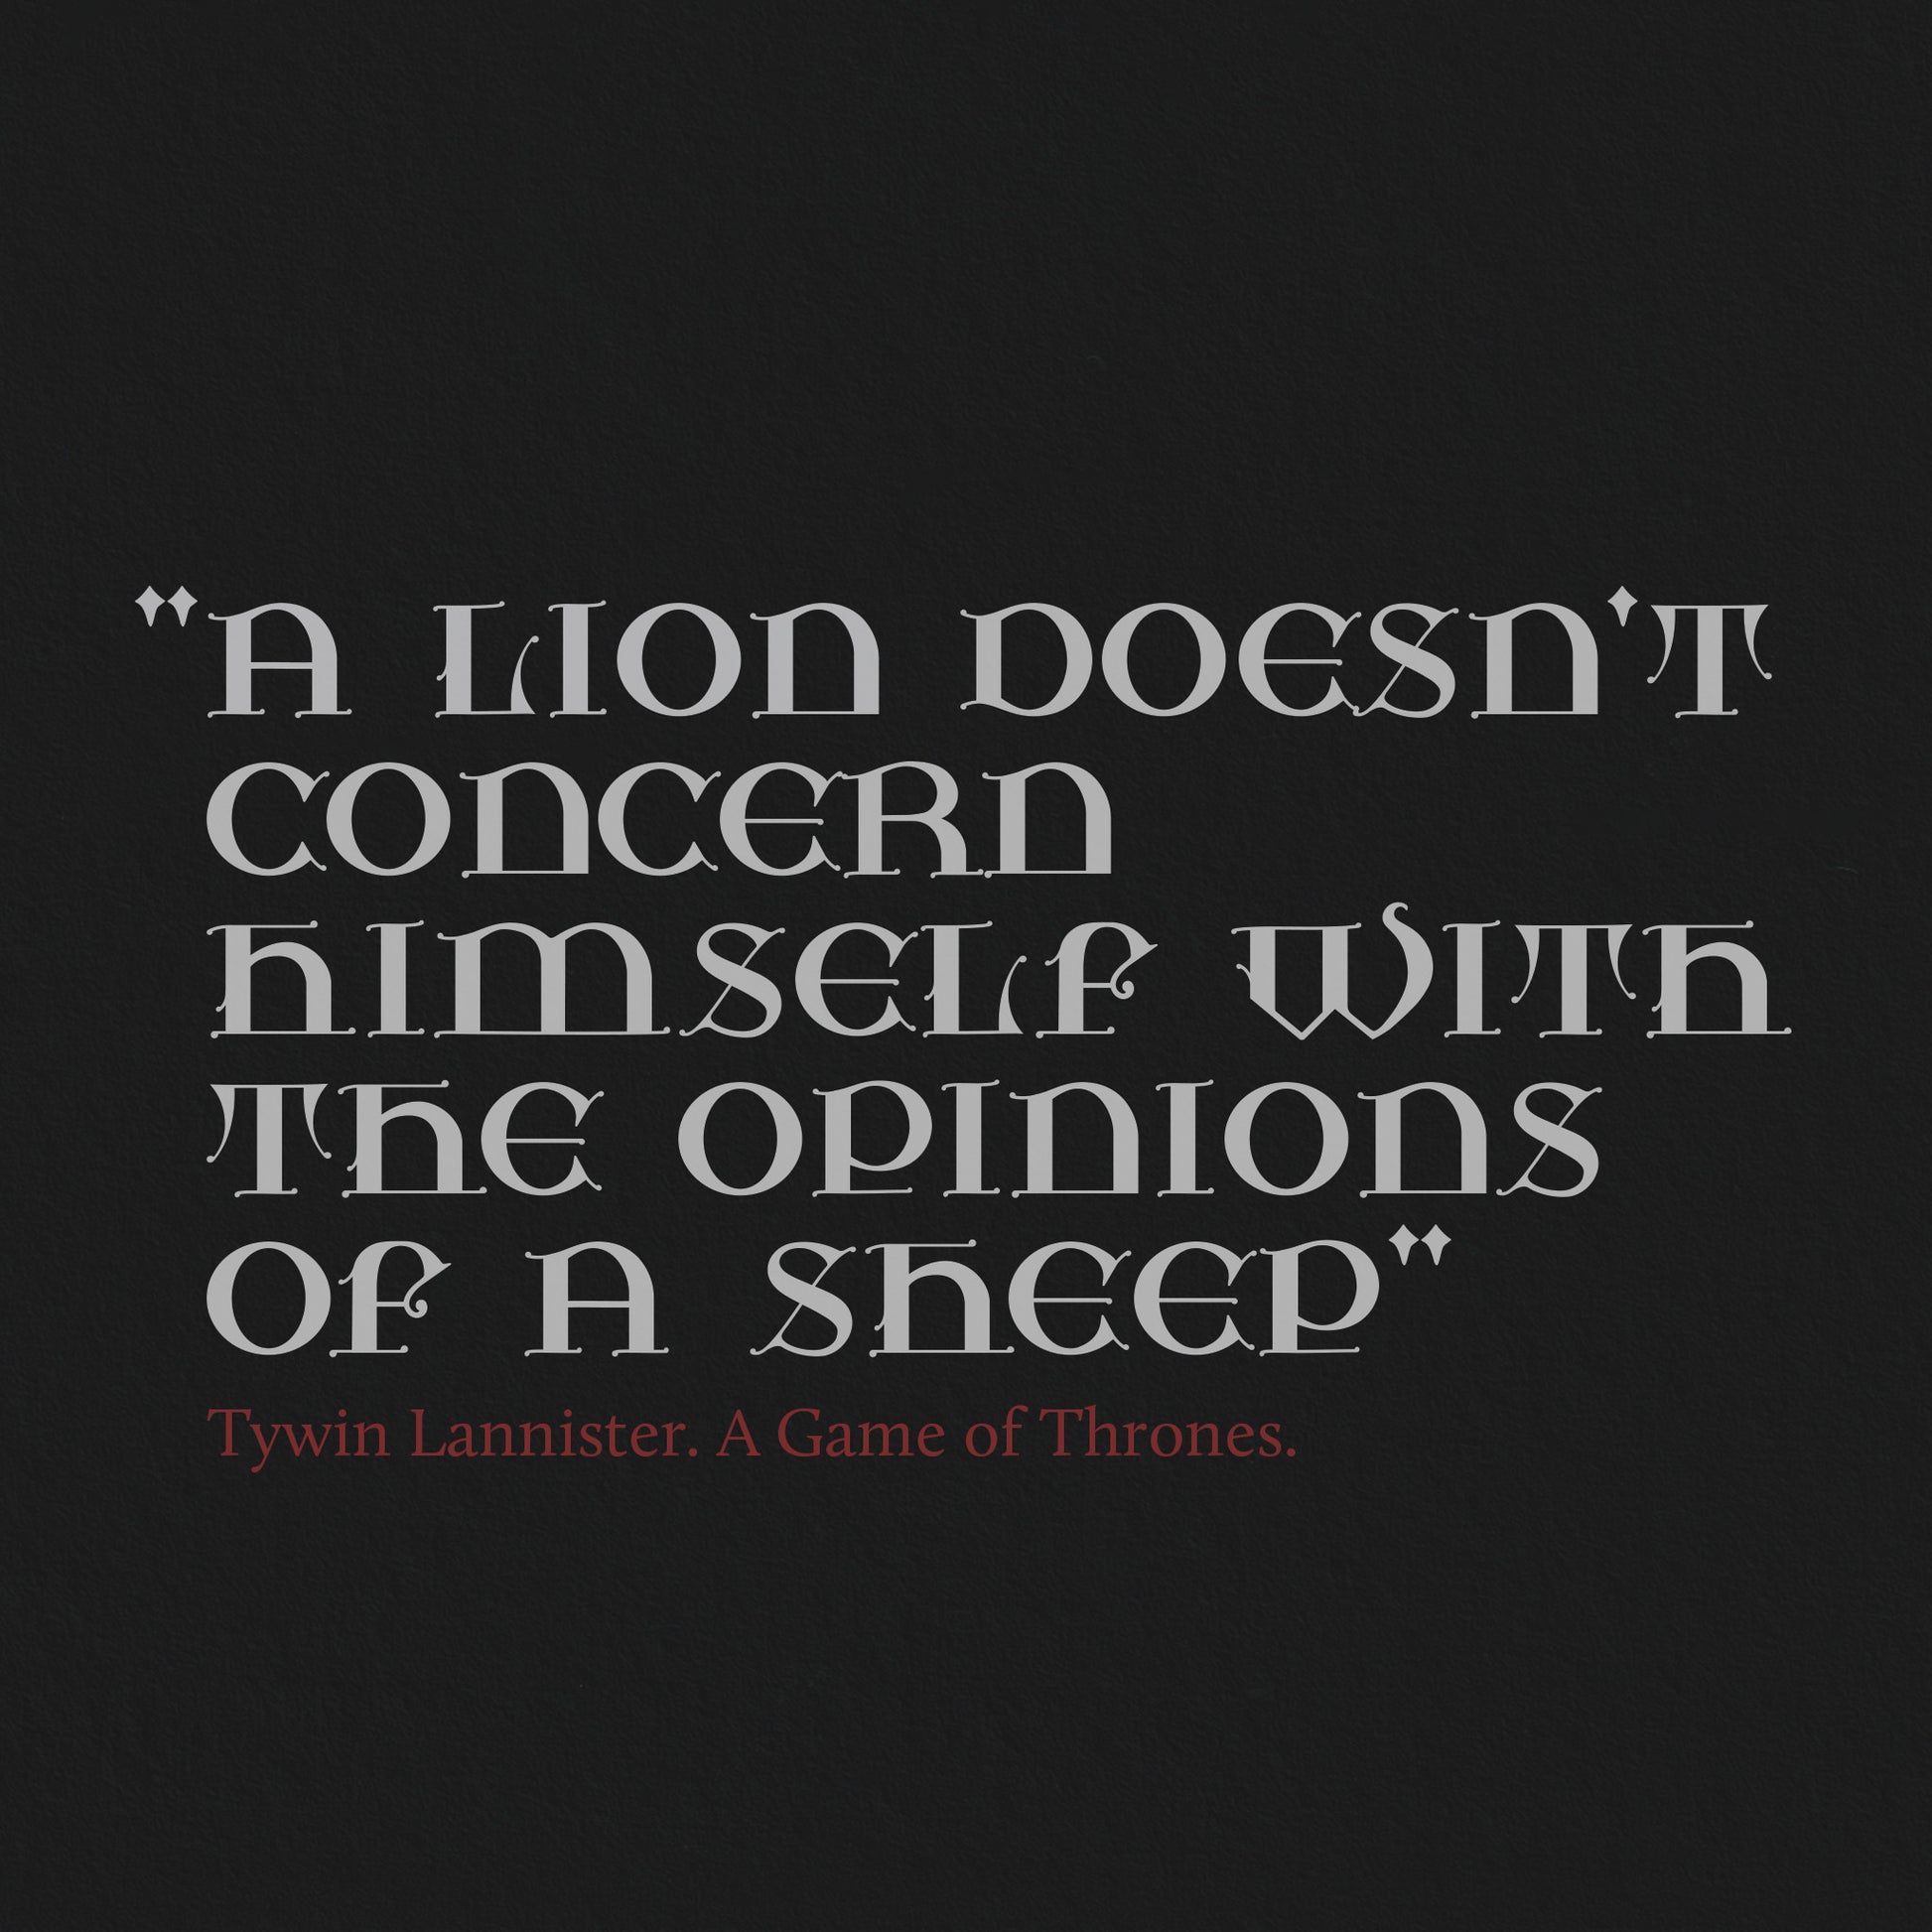 Dark background with light text showing a quote from A game of Thrones